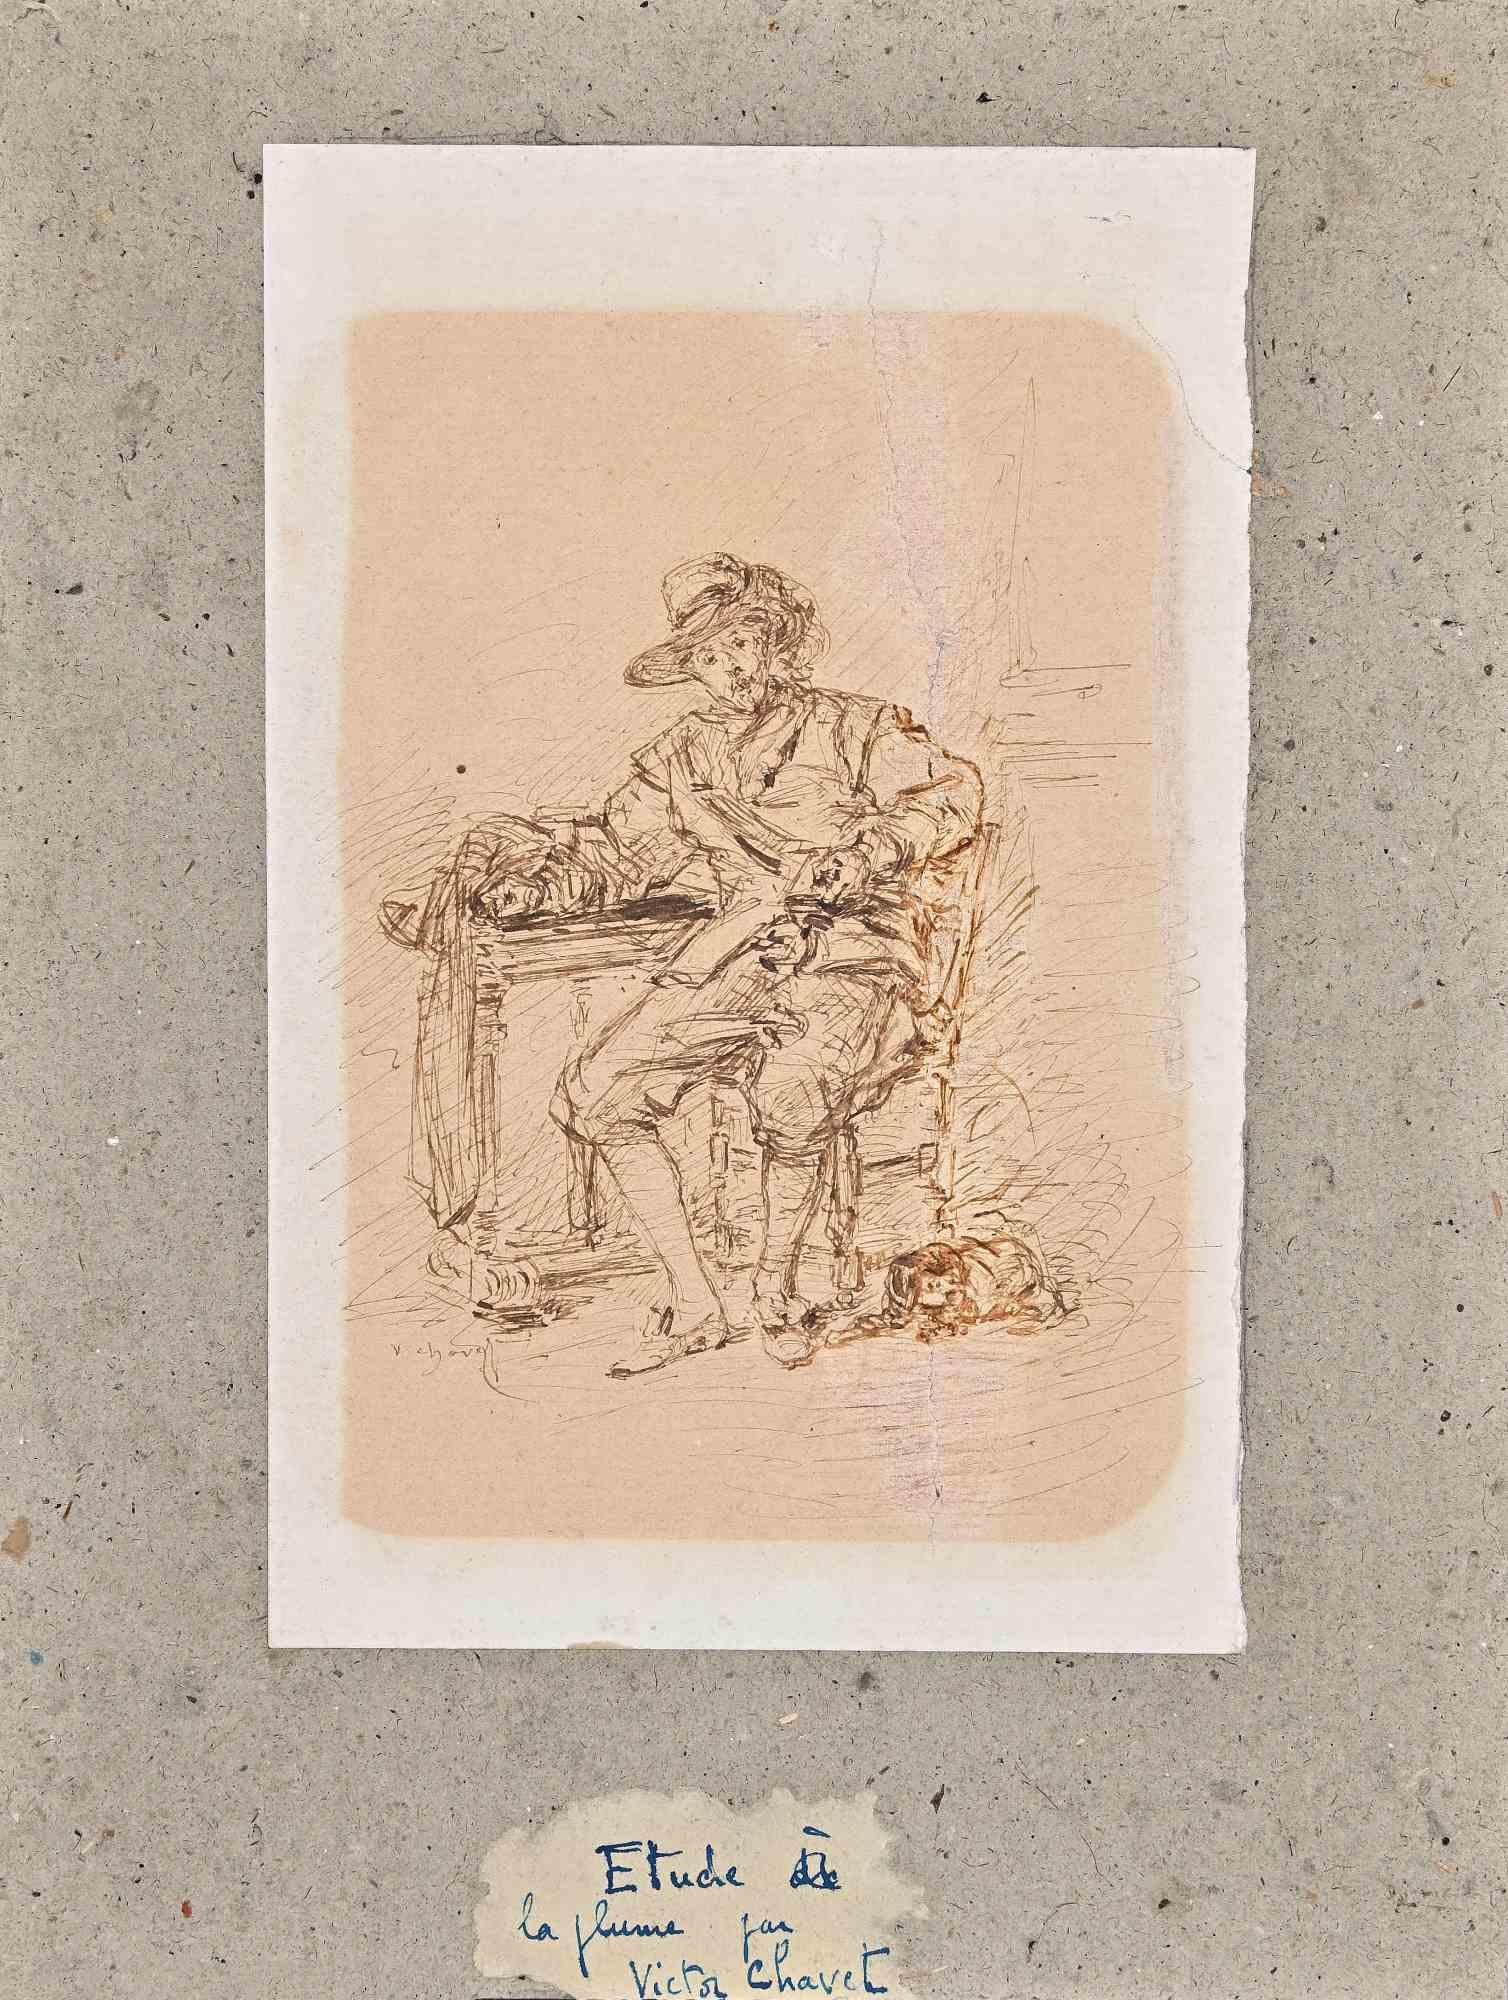 Study of Figure is a China ink Drawing realized in the mid-19th Century by Victor Chavet (1822-1906).

Hand-signed on the lower.

Glued on a hard Cardboard Passepartout: 28 x 21 cm, original one by the publisher, on the rear Stamped " Adolphe